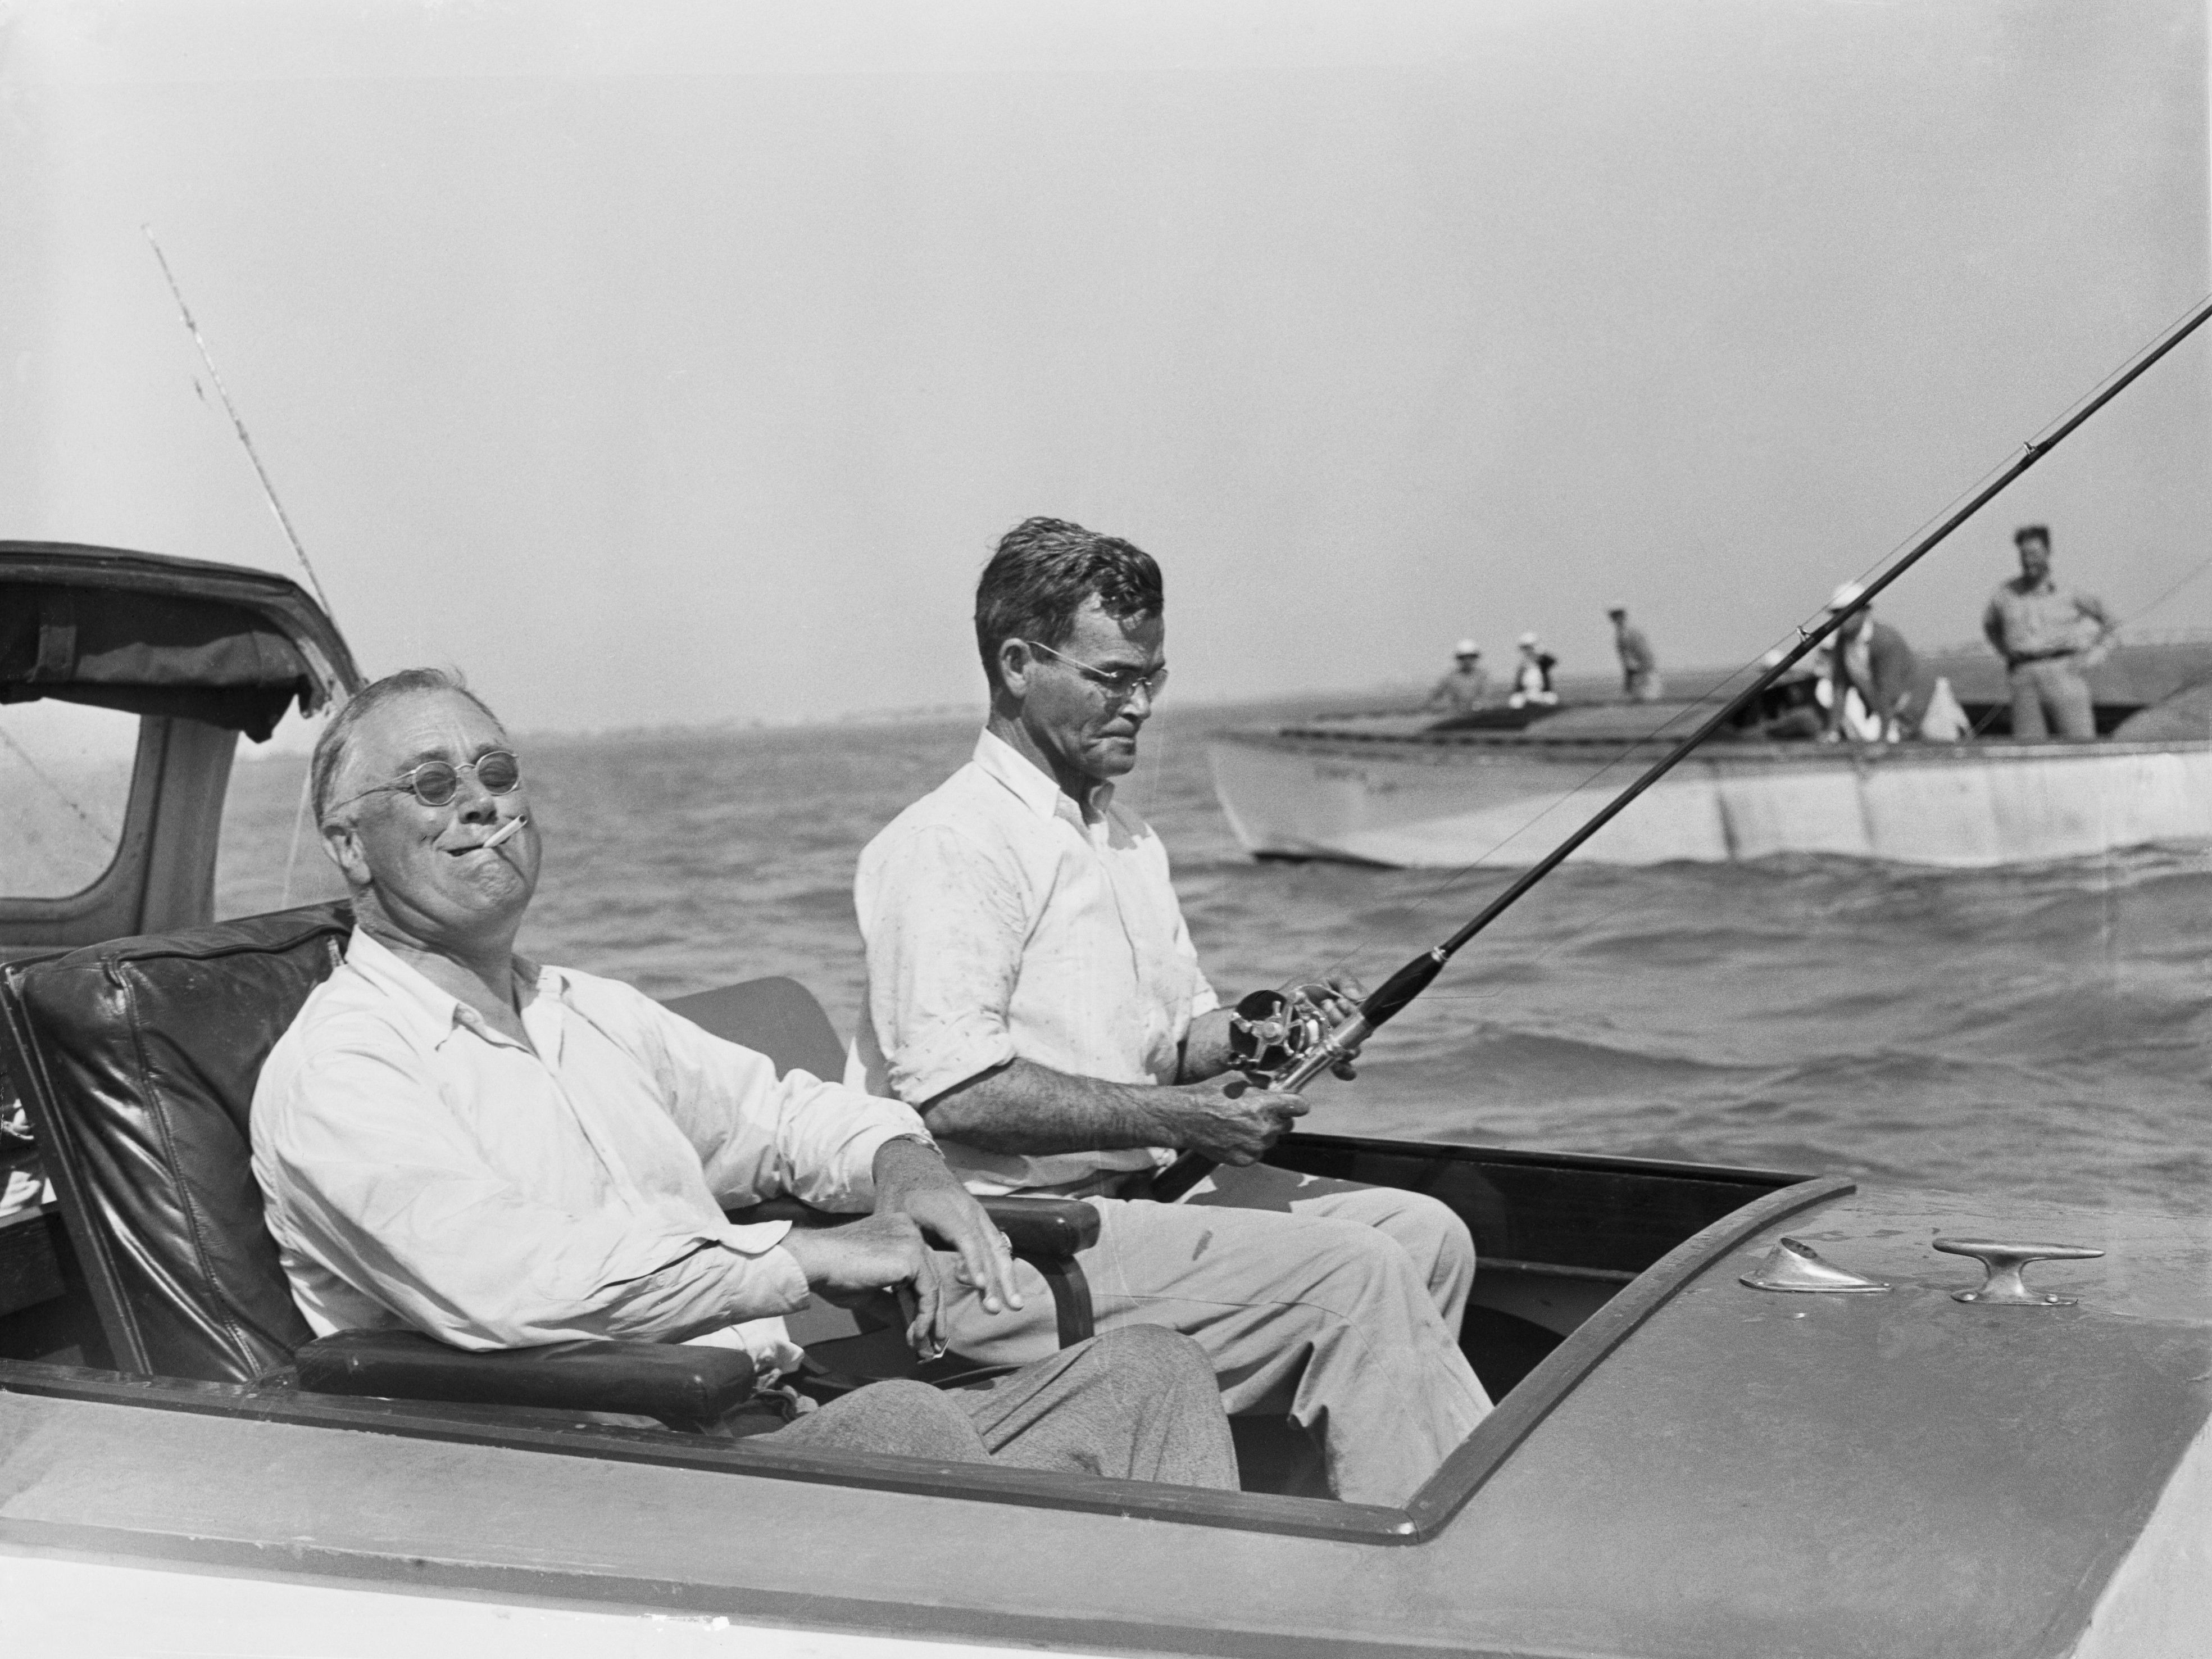 President Roosevelt puffs a cigarette here, while fishing for tarpon during his vacation on the Gulf of Mexico.